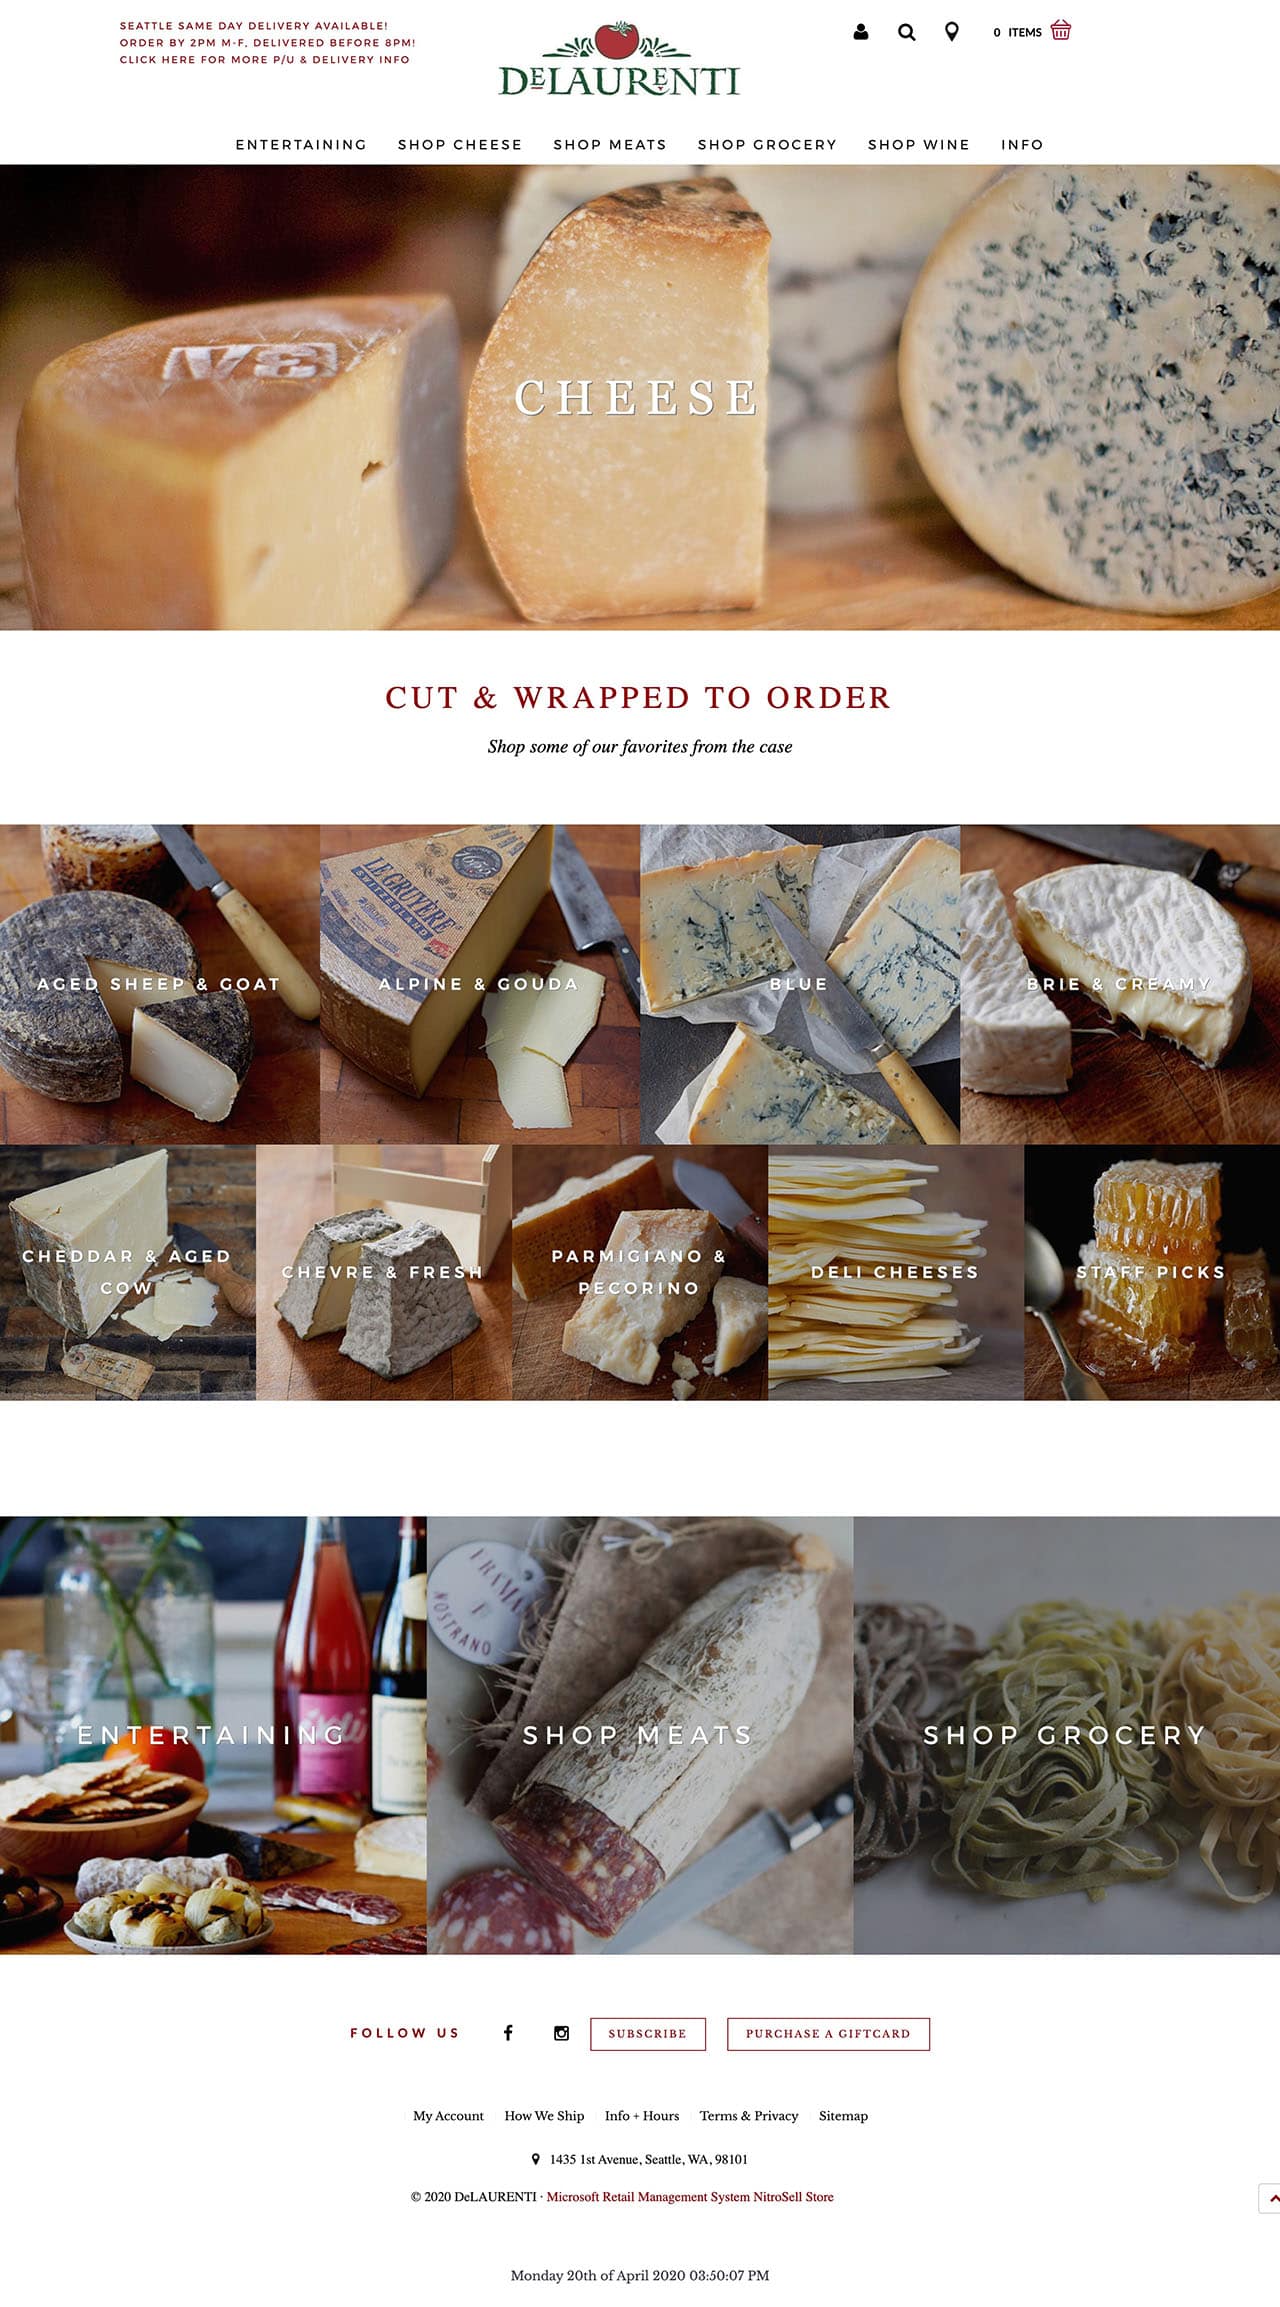 image of DeLaurenti's cheese page